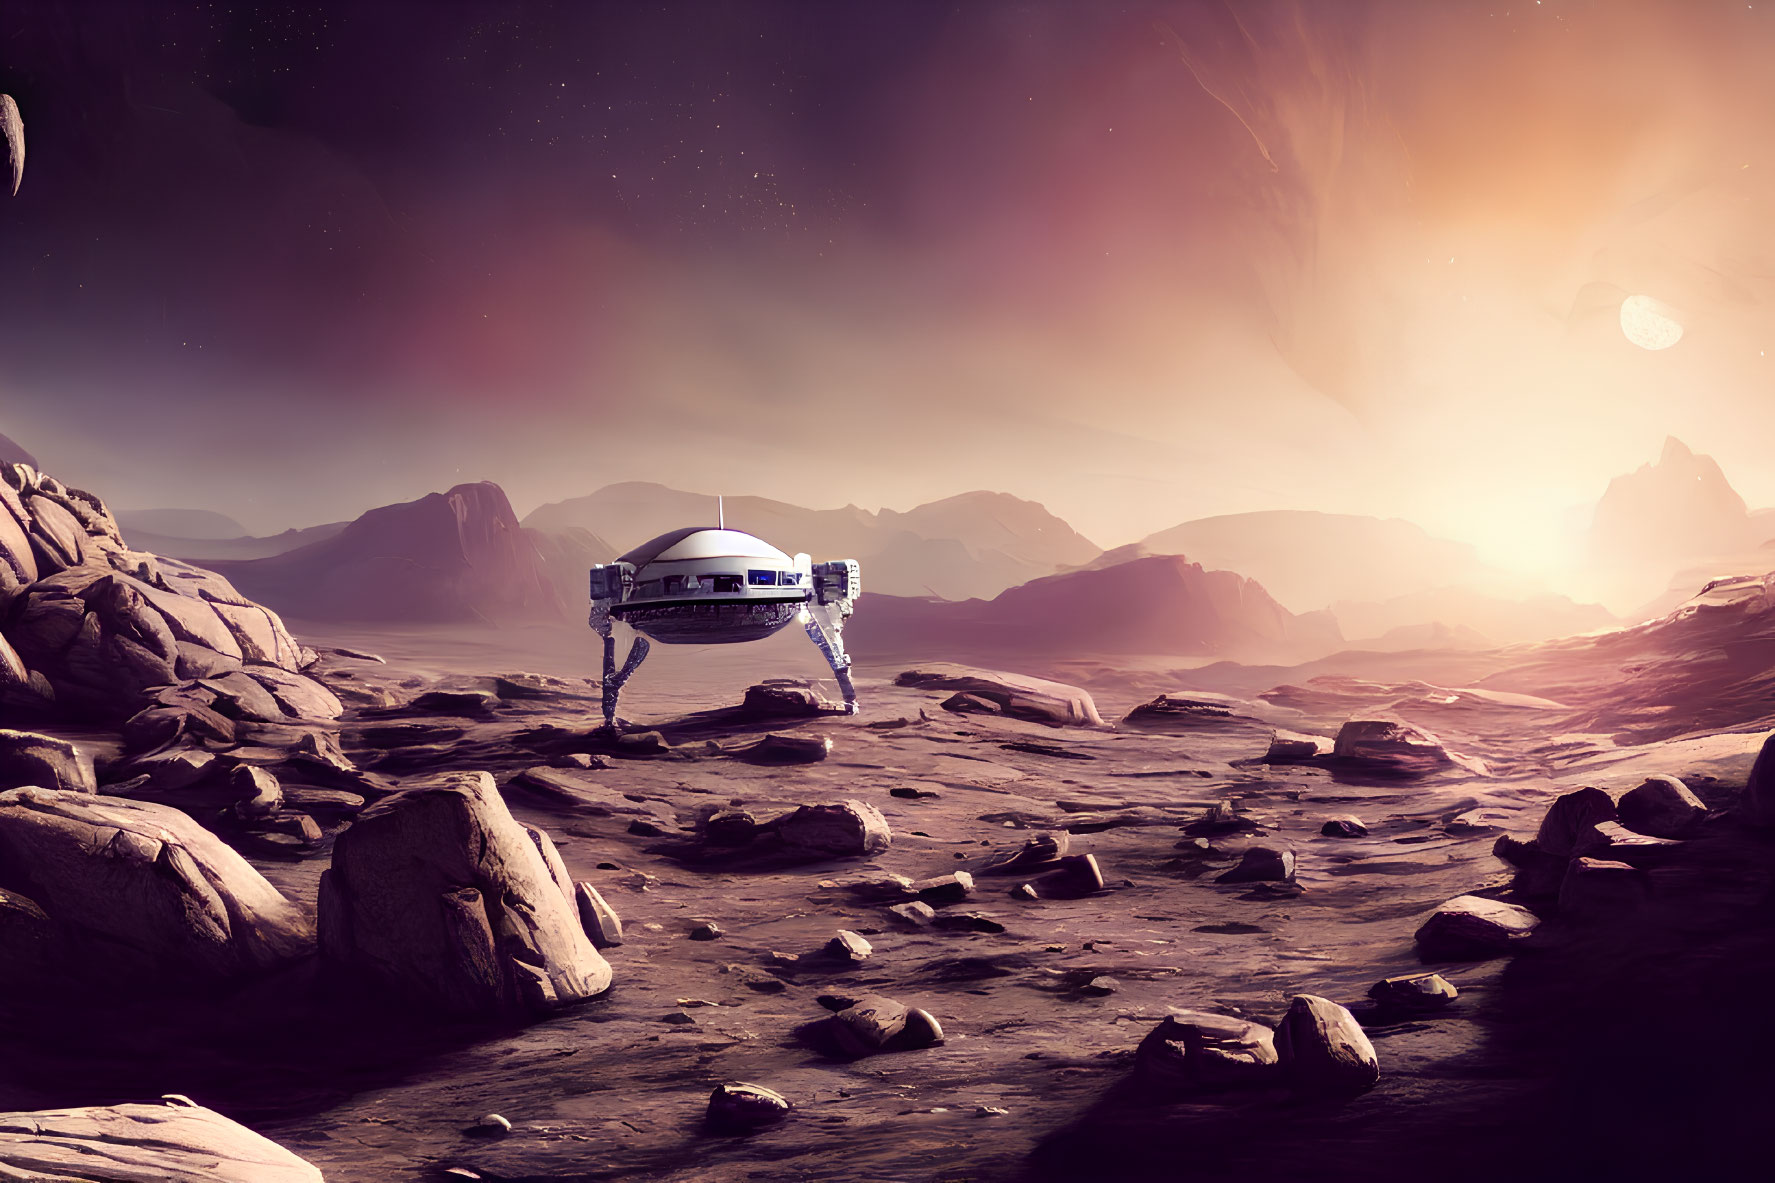 Robotic lander in rocky alien landscape with low sun and distant planet.